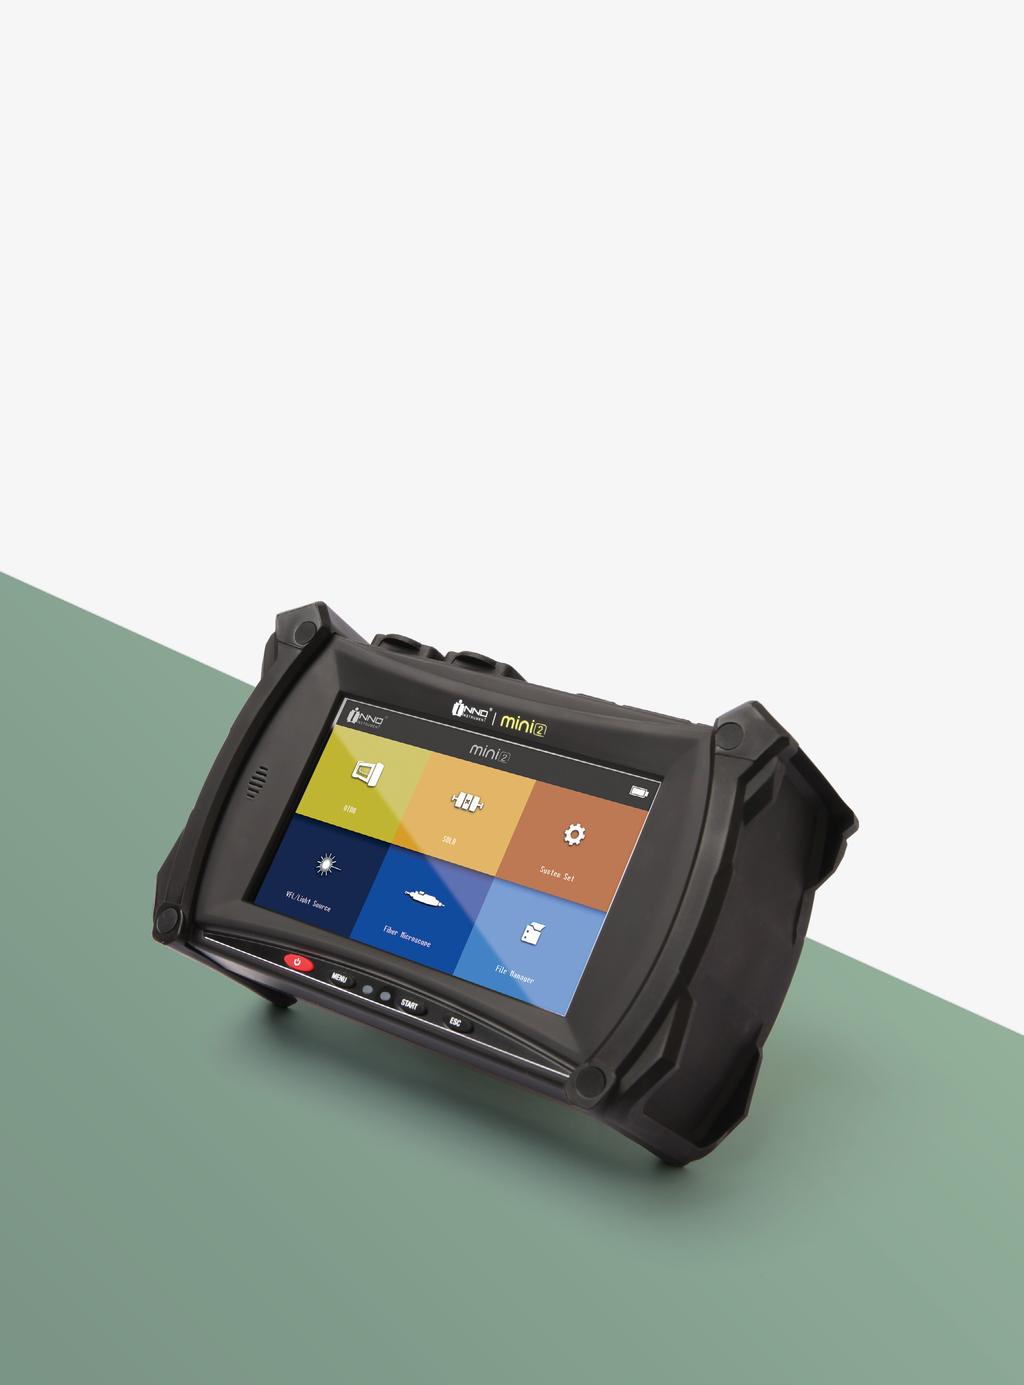 MOST ACCURATE COMPACT OTDR SOLA, Simplify The OTDR Test Process 5 Touch Screen with Smart GUI 8GB Internal Storage with